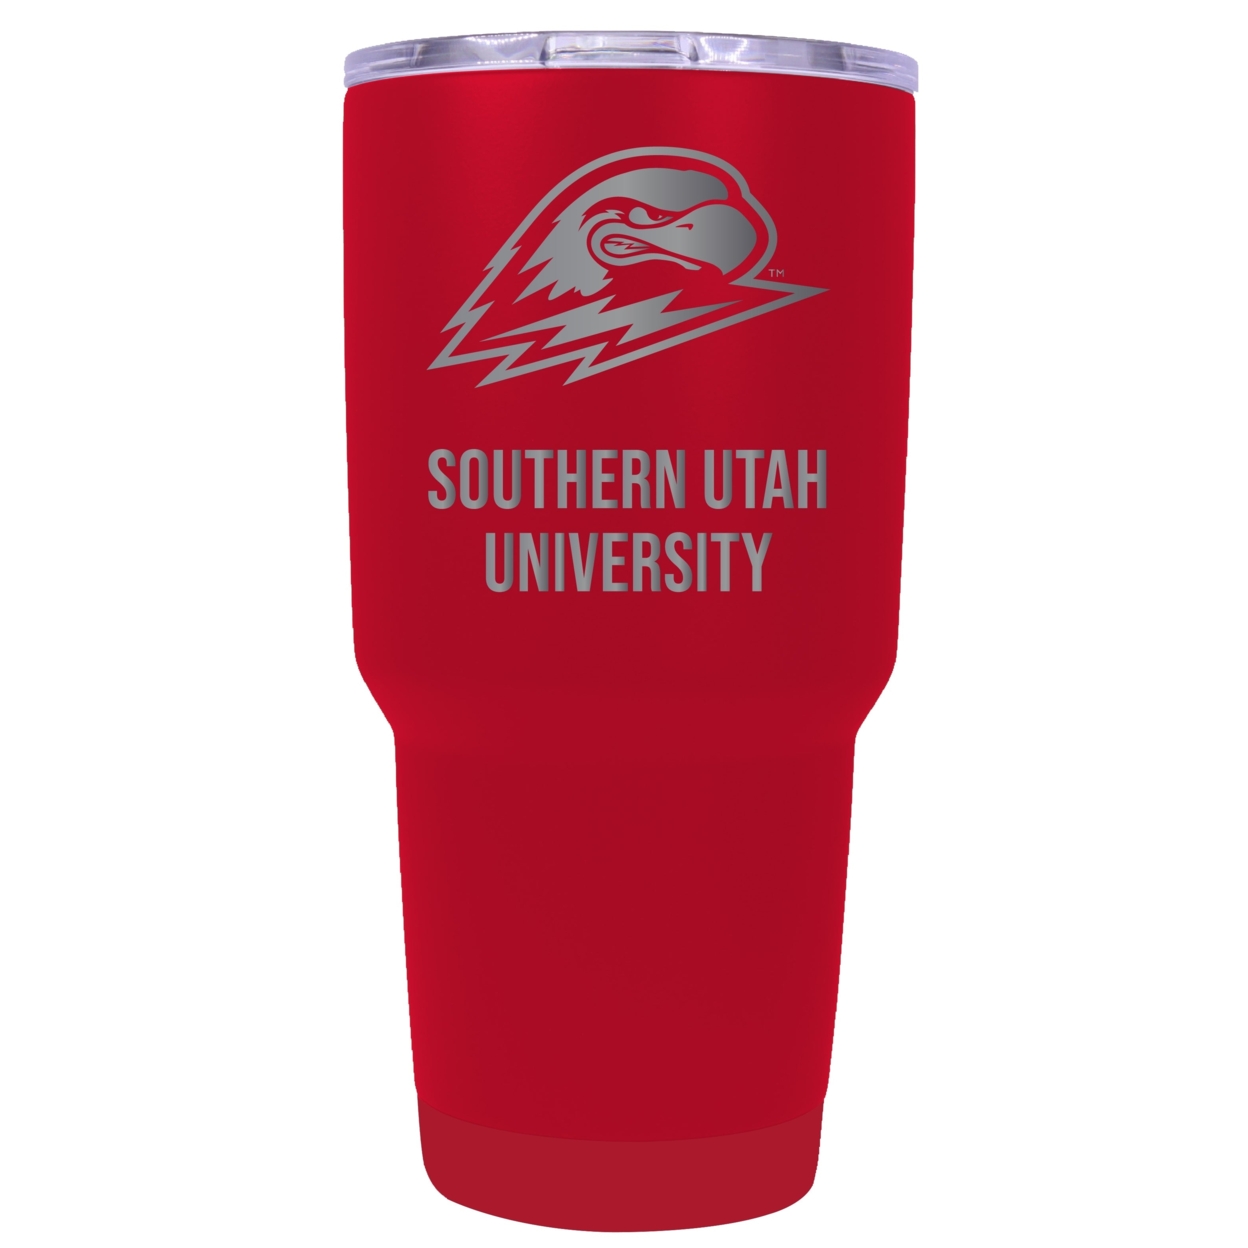 Southern Utah University 24 Oz Laser Engraved Stainless Steel Insulated Tumbler - Choose Your Color. - Red